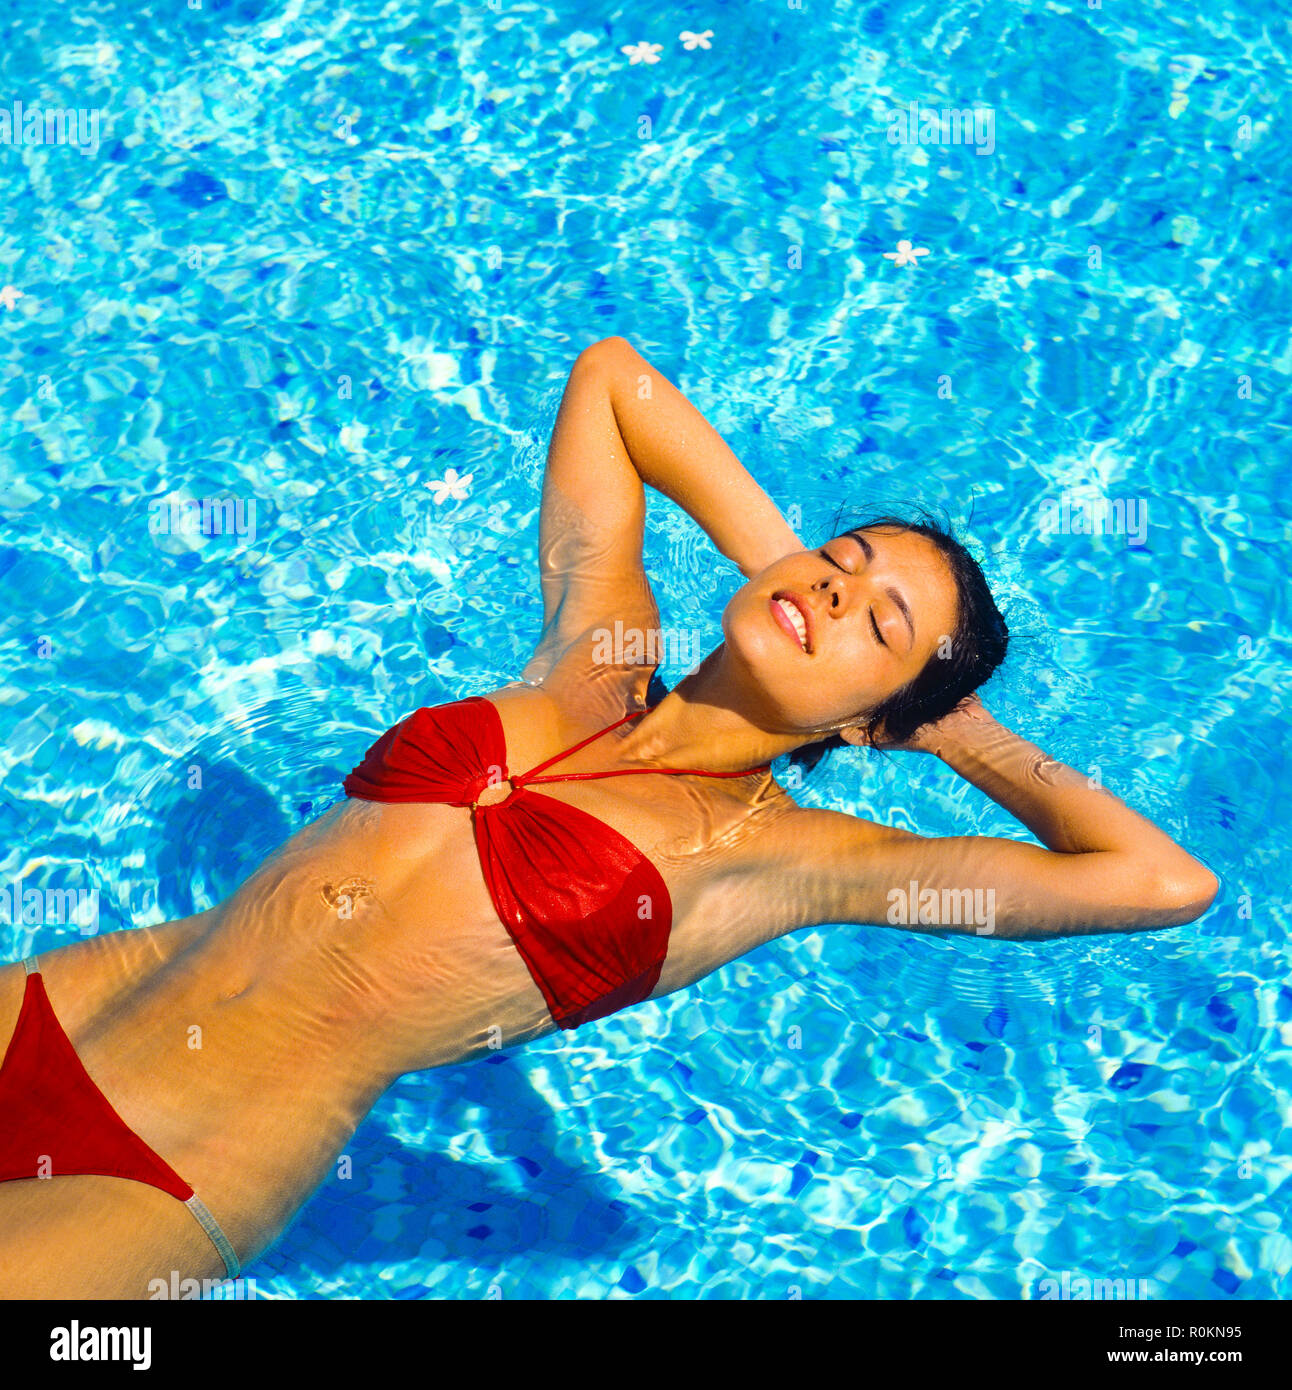 Young woman with red bikini floating on water in swimming pool, Guadeloupe, French West Indies, Stock Photo